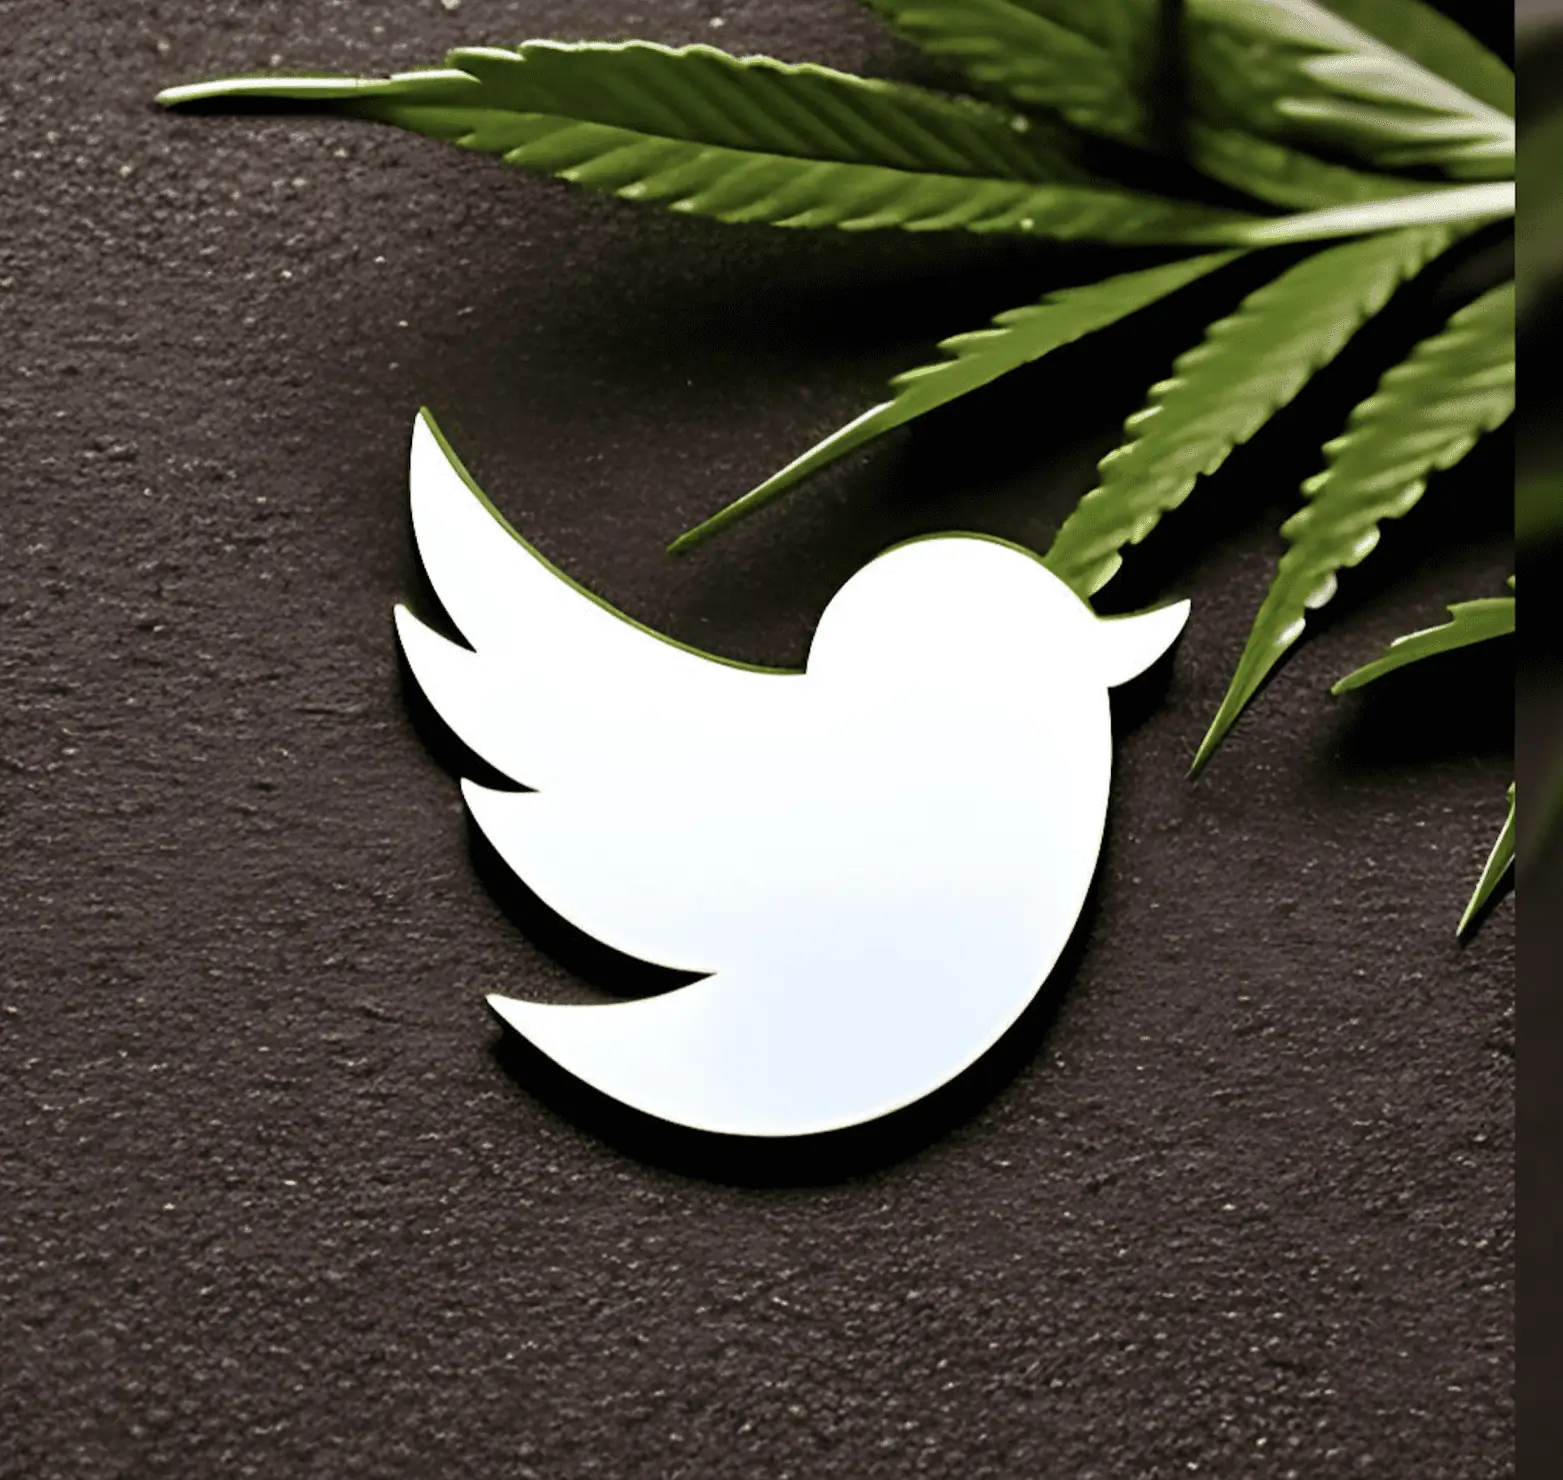 Twitter is Allowing Cannabis Ads? Not really!